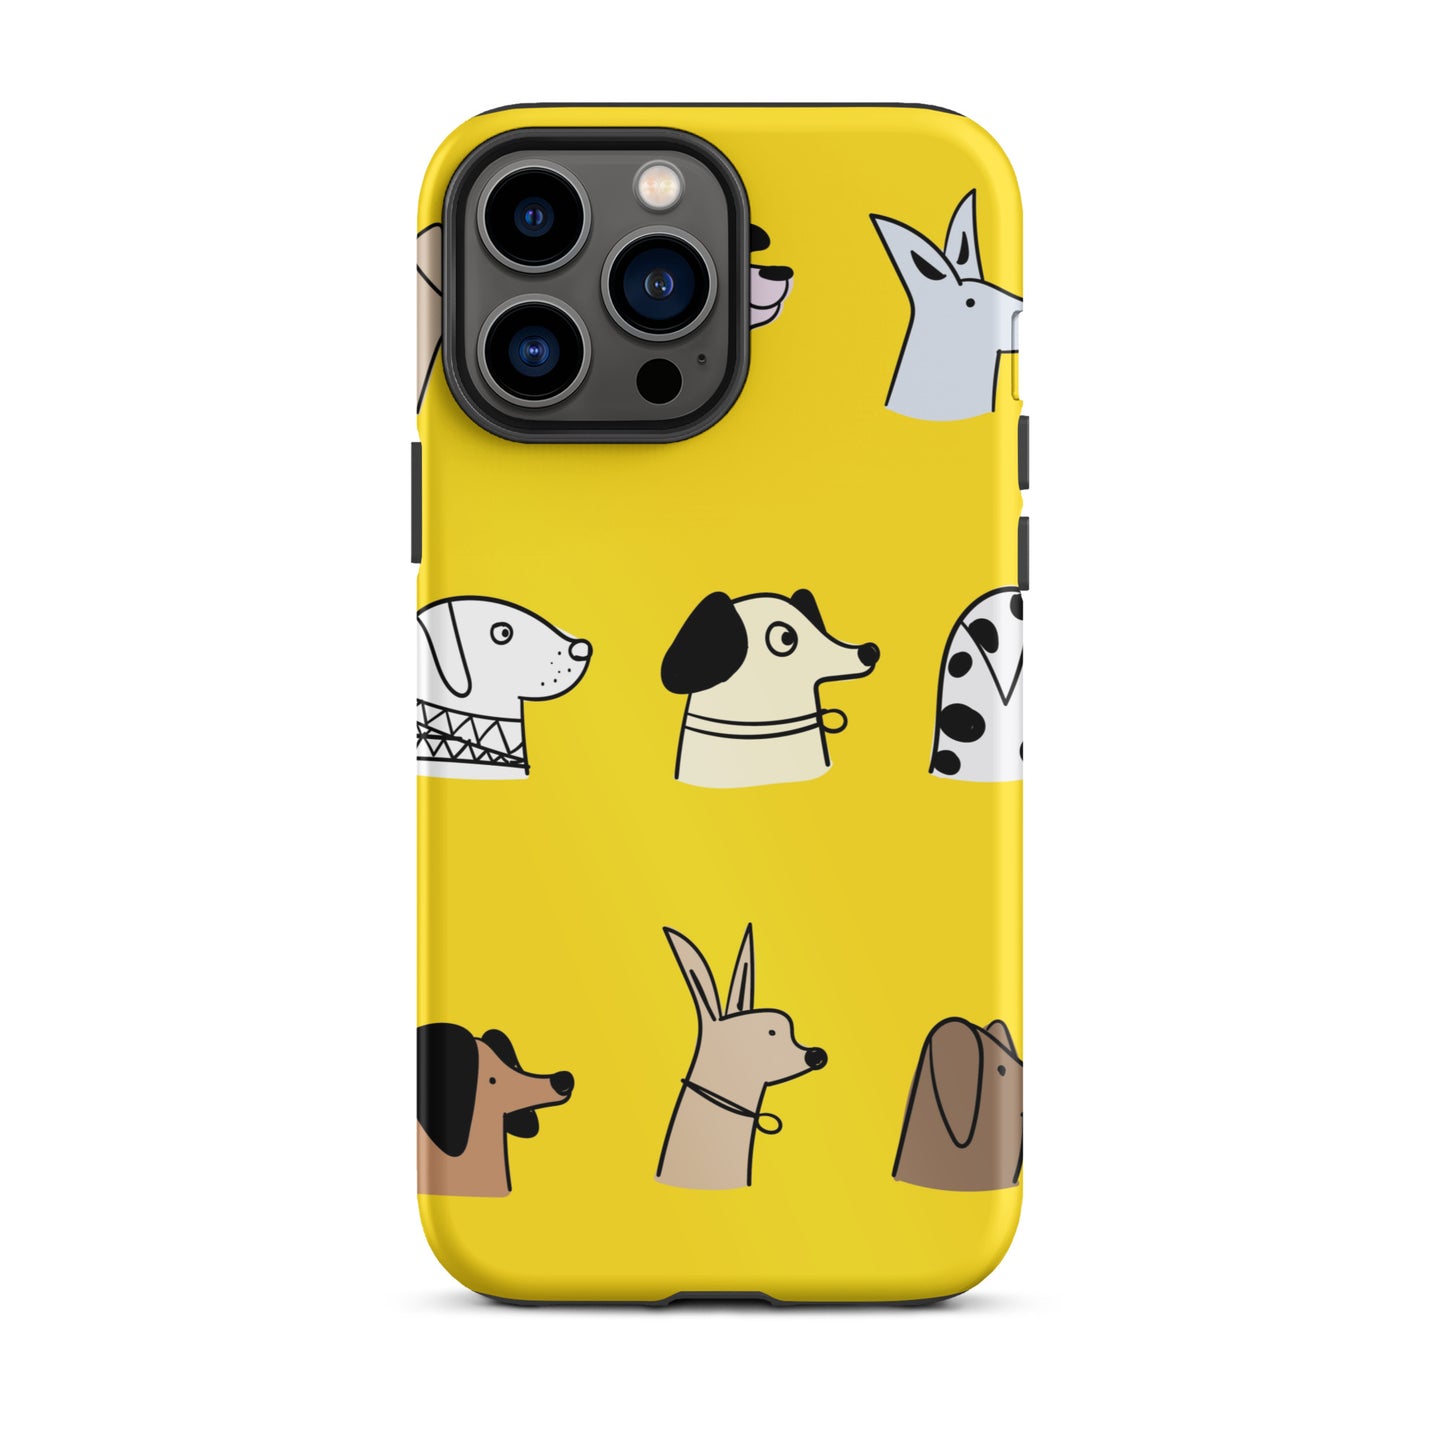 Dogs iPhone case